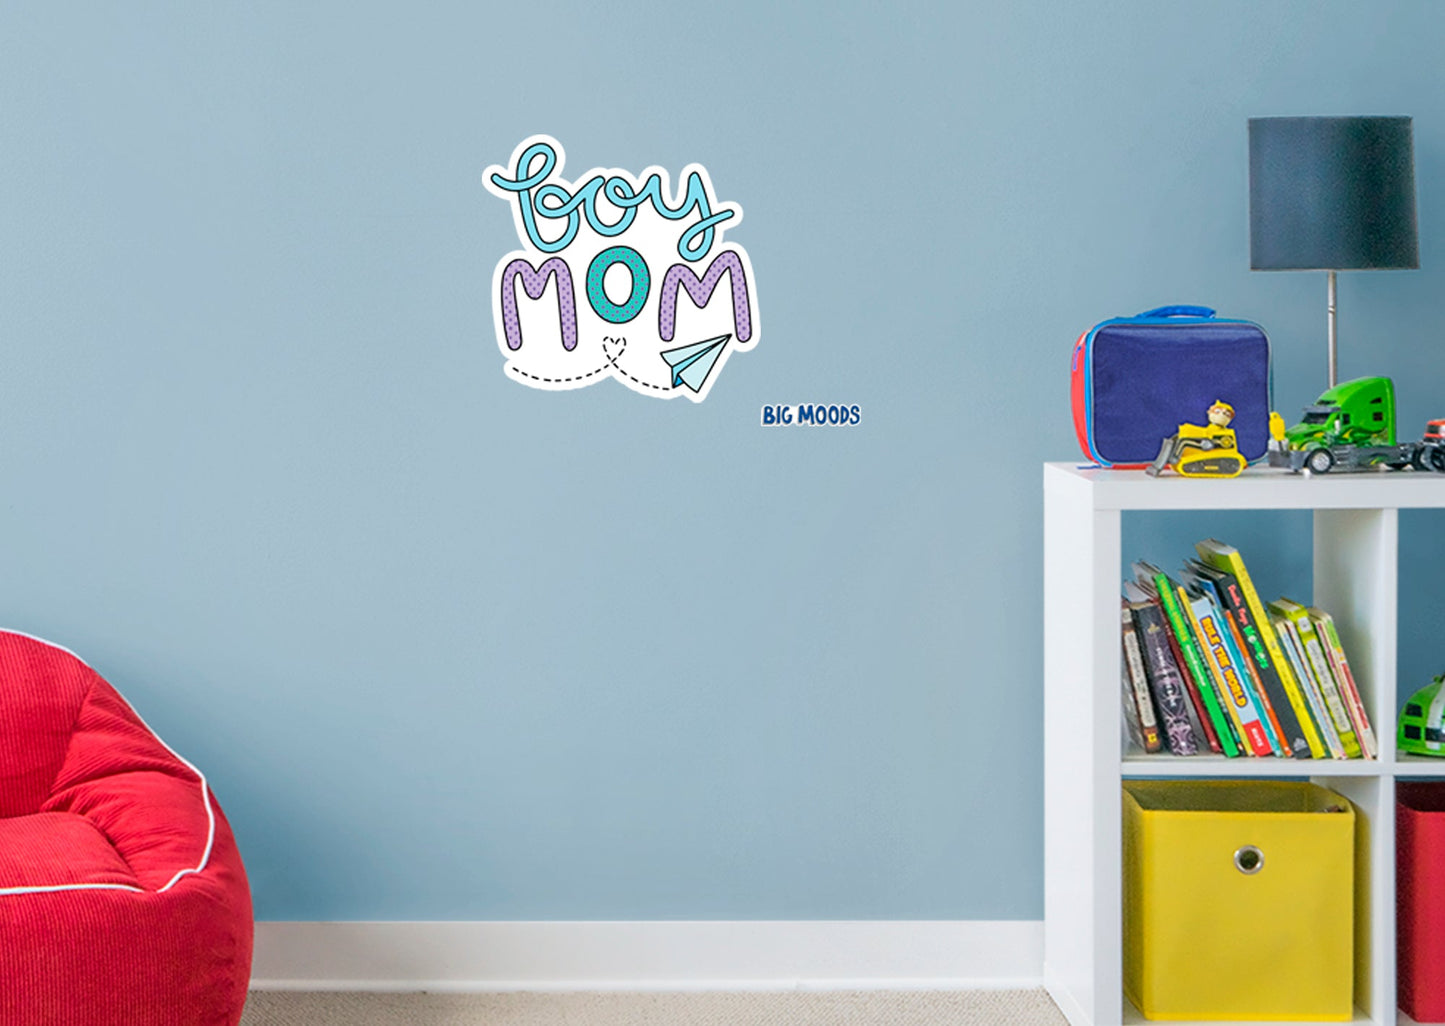 Boy Mom Paper Plane        - Officially Licensed Big Moods Removable     Adhesive Decal